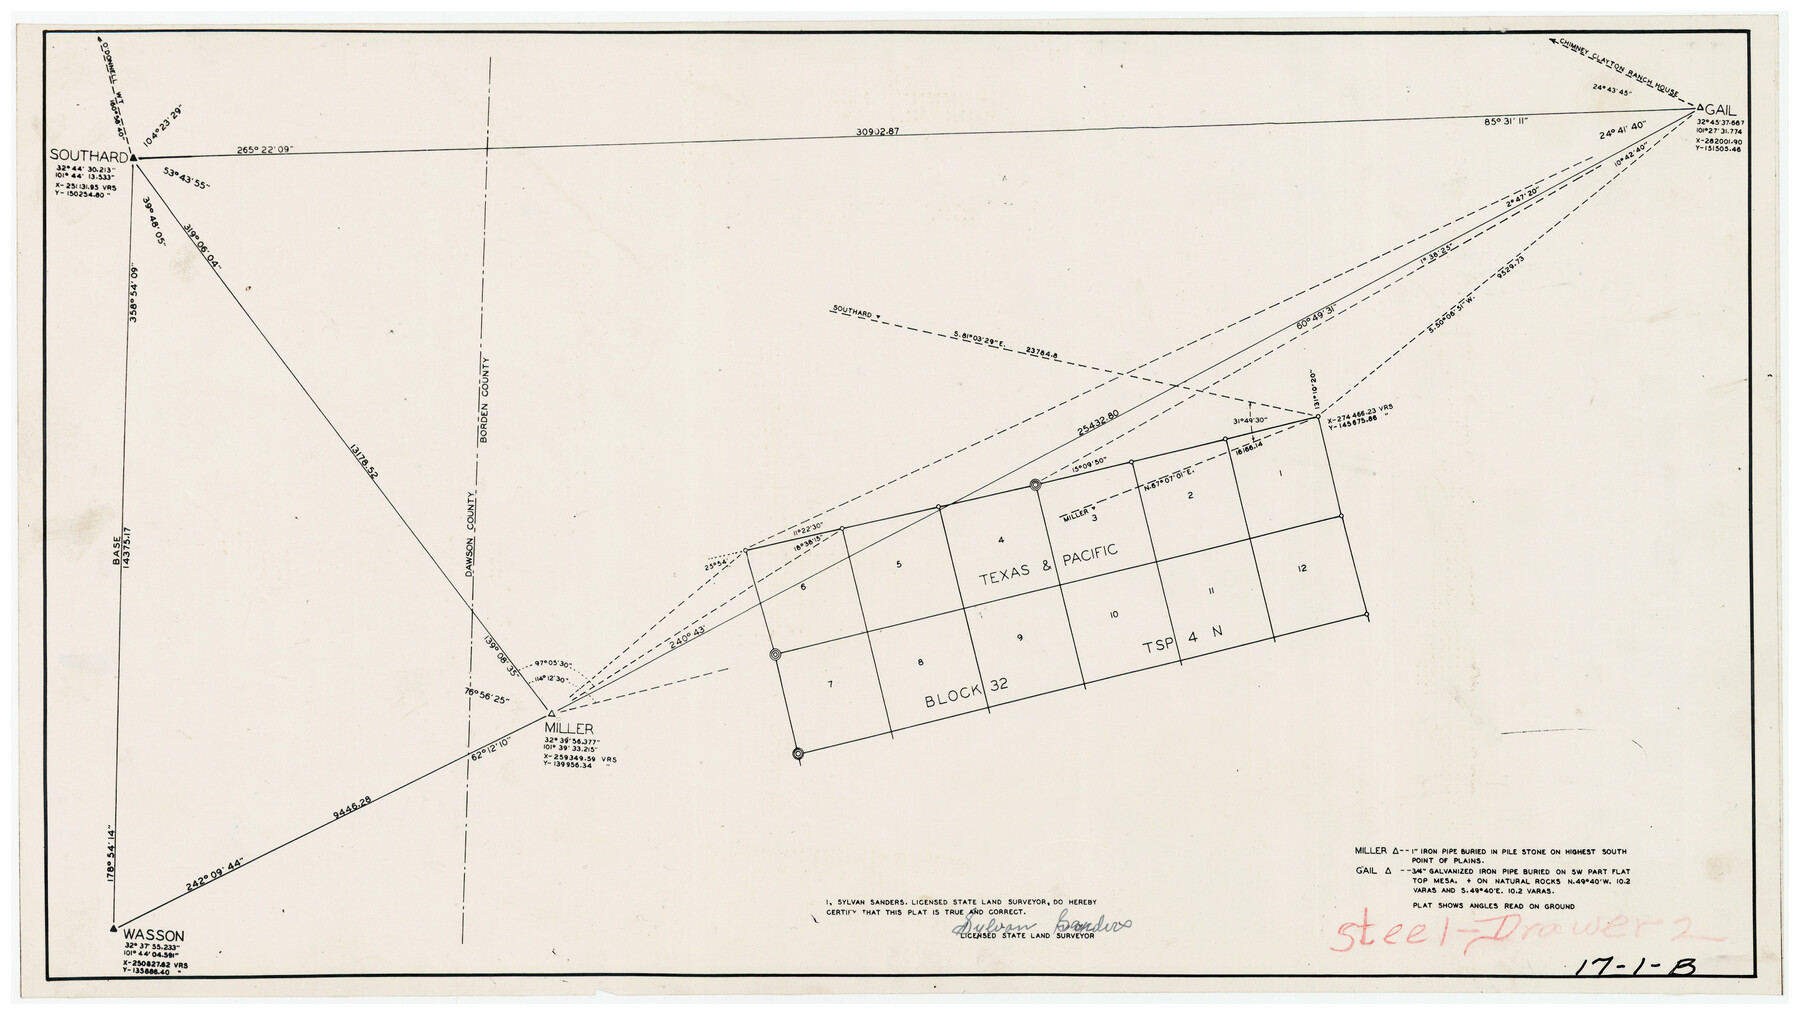 90143, [Texas & Pacific Block 32, T-4-N showing ties to triangulation stations], Twichell Survey Records